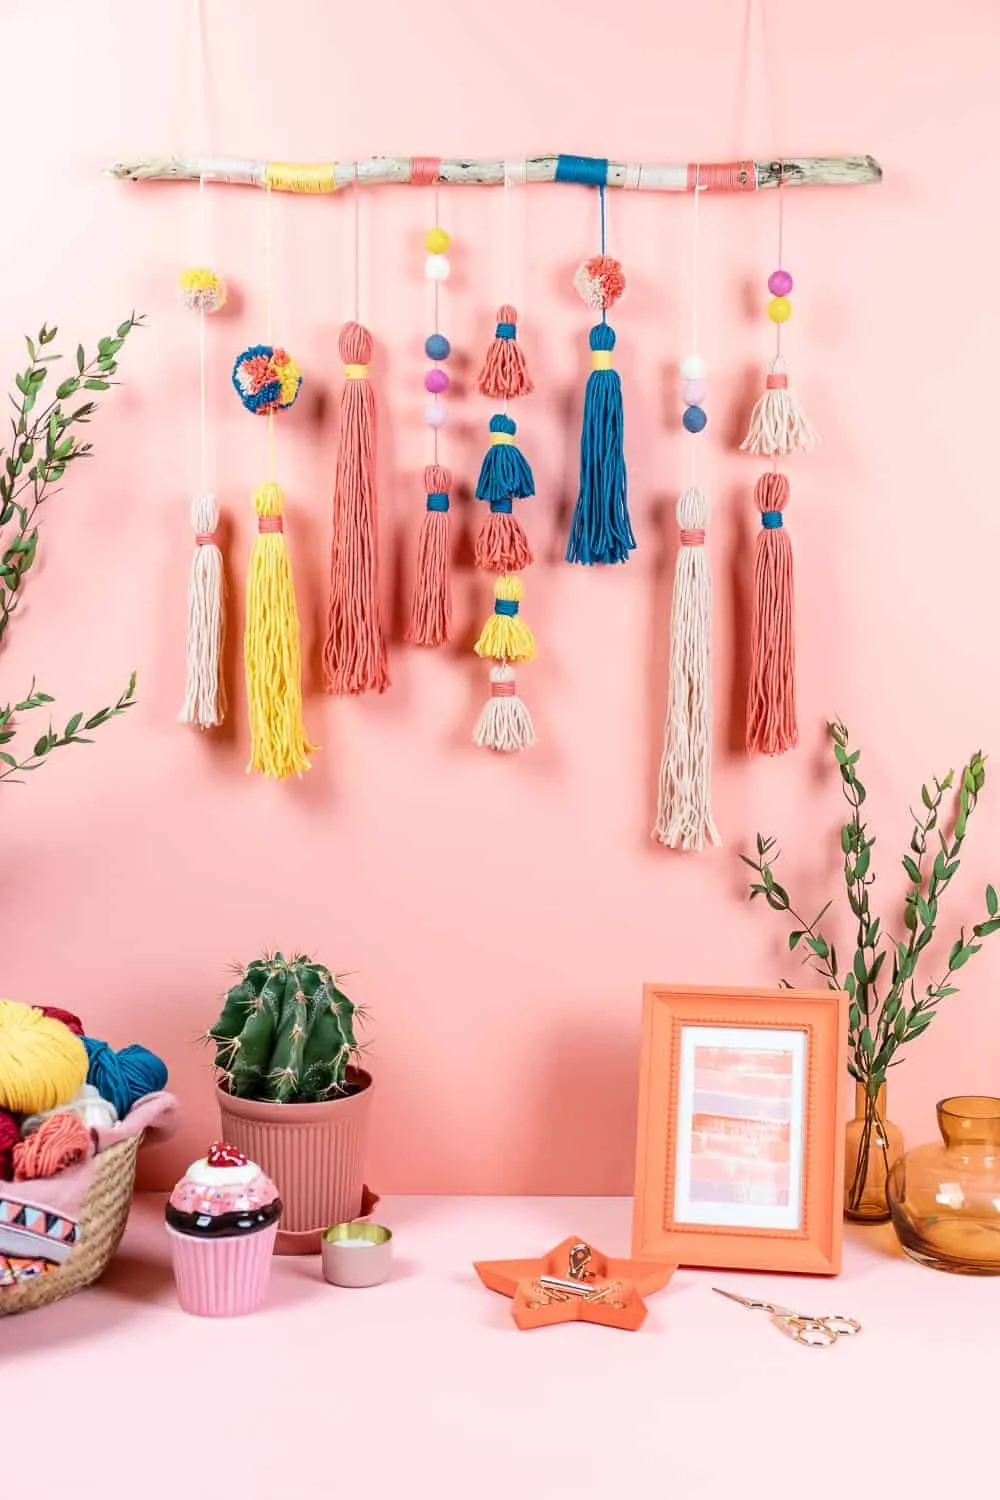 Colour Tassels and a pink wall